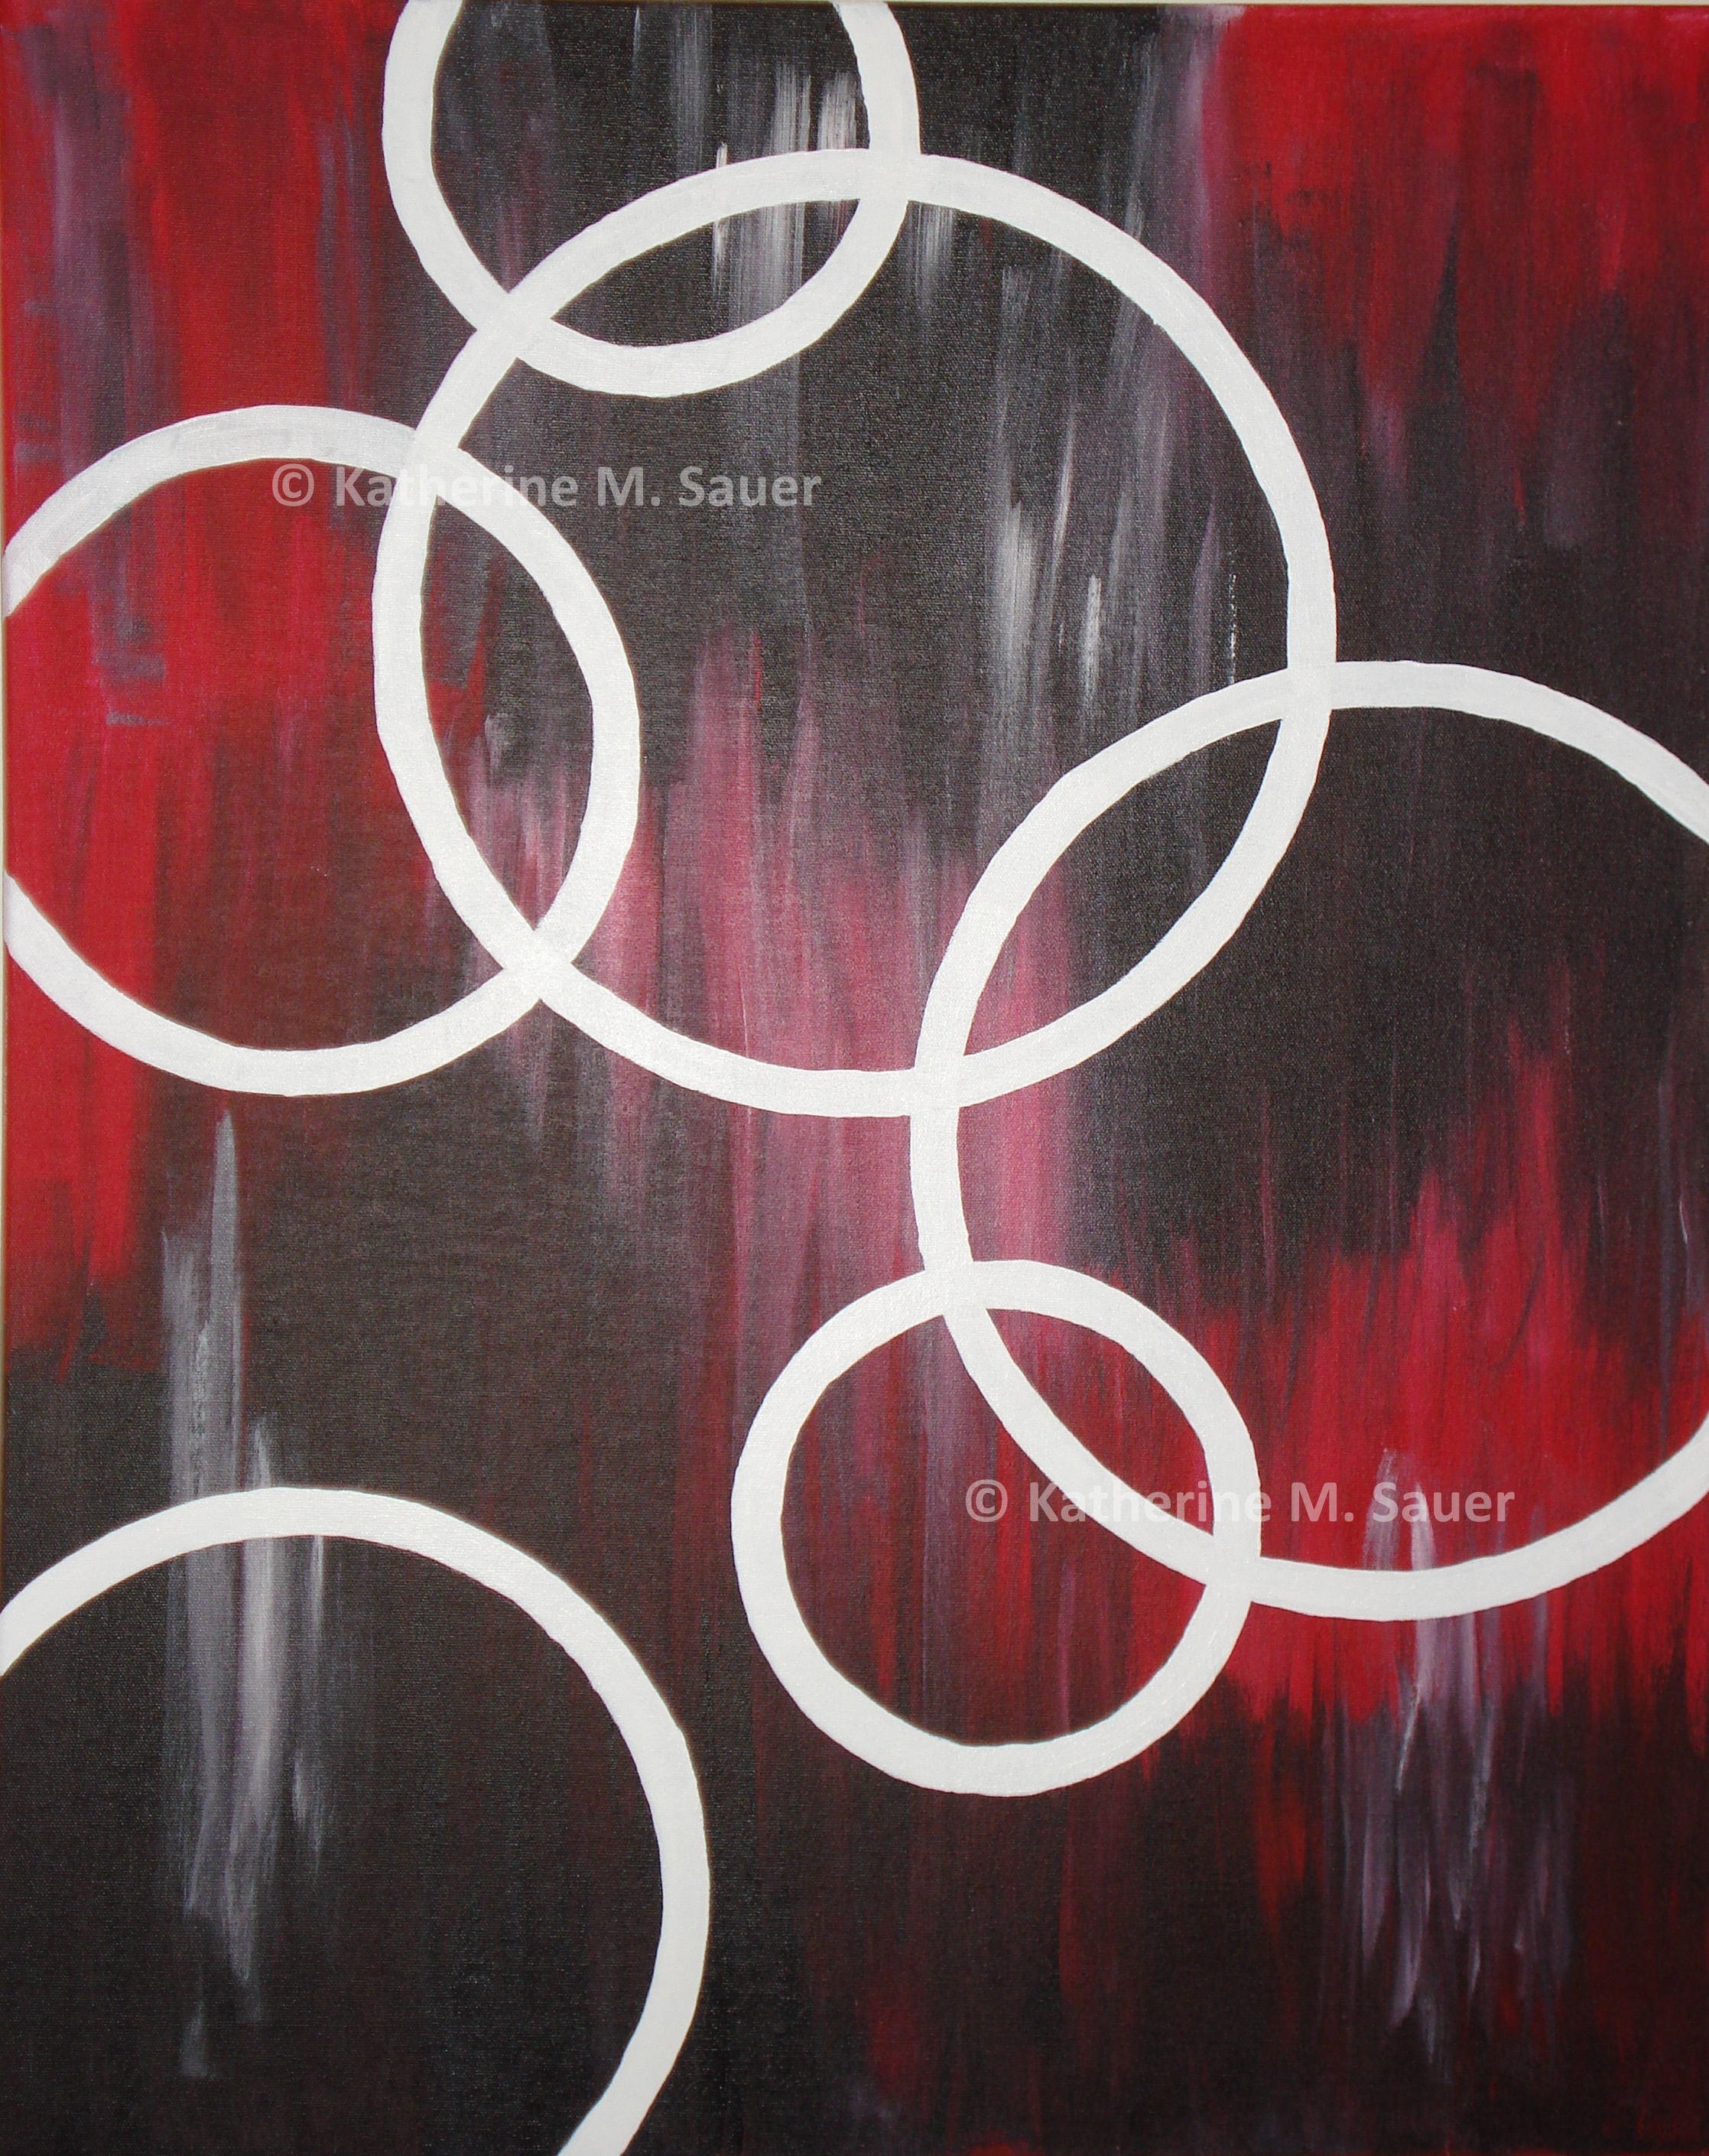 a painting of white rings in a variety of sizes, over a background of red, black, and gray